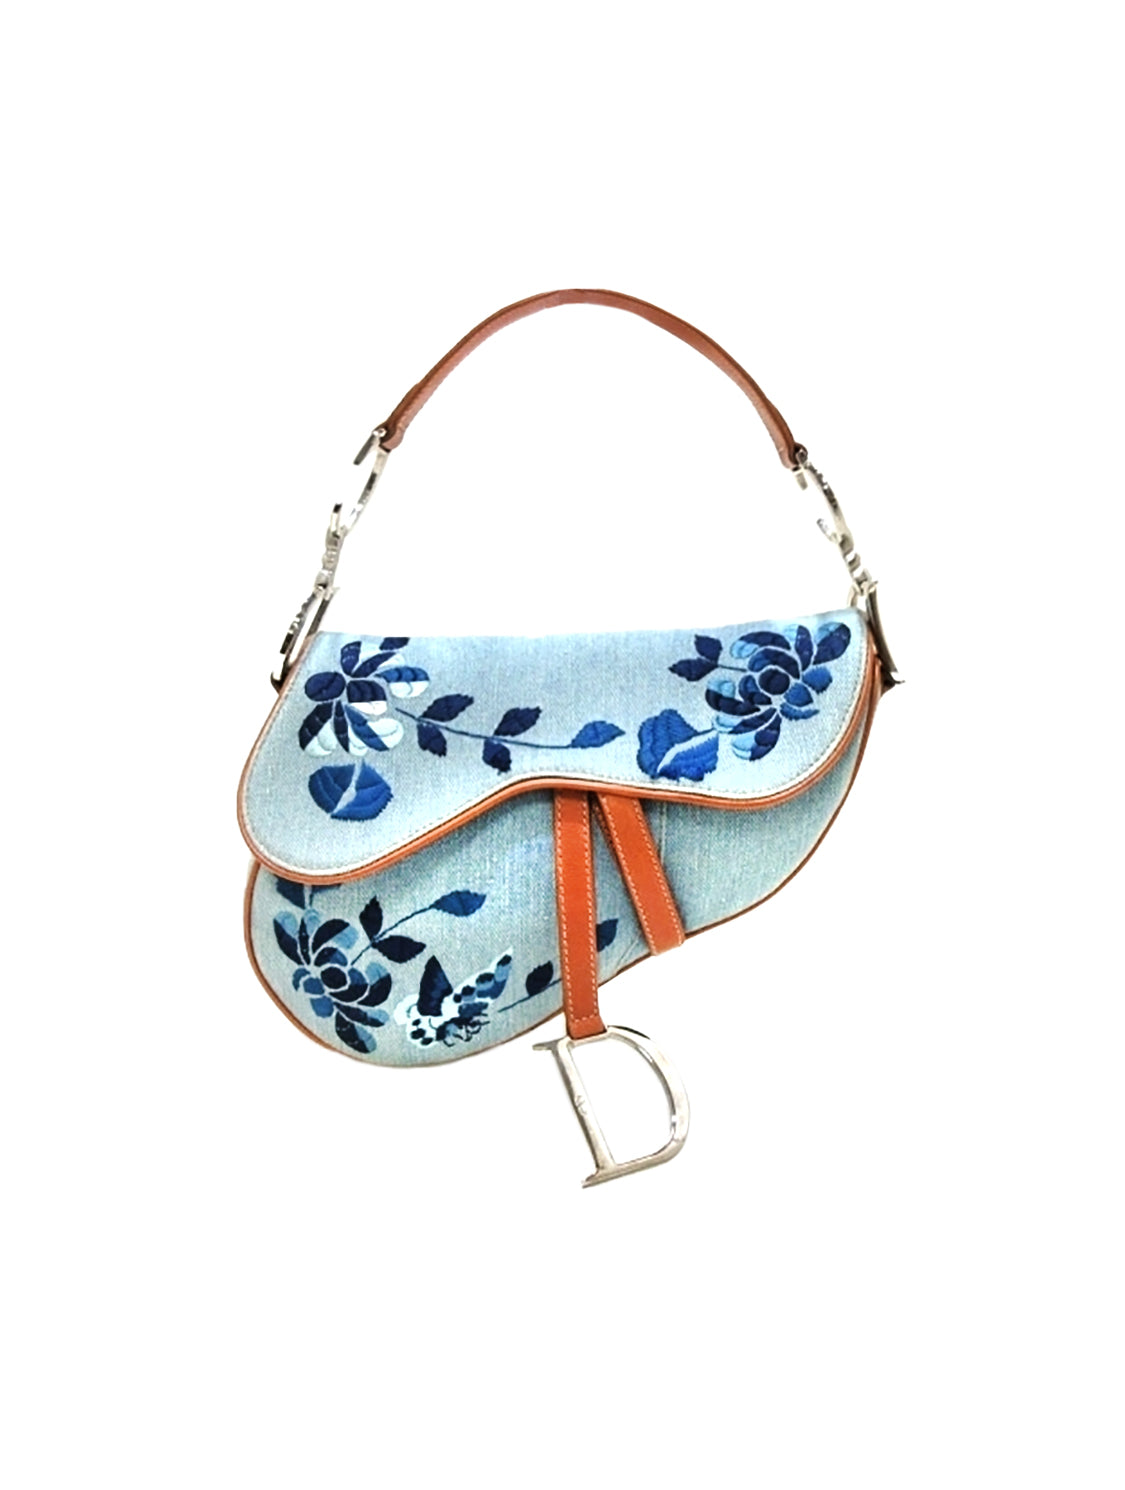 Diors New Saddle Bag In Embroidered Denim Is The Fall Accessory Youre  About To See Everywhere